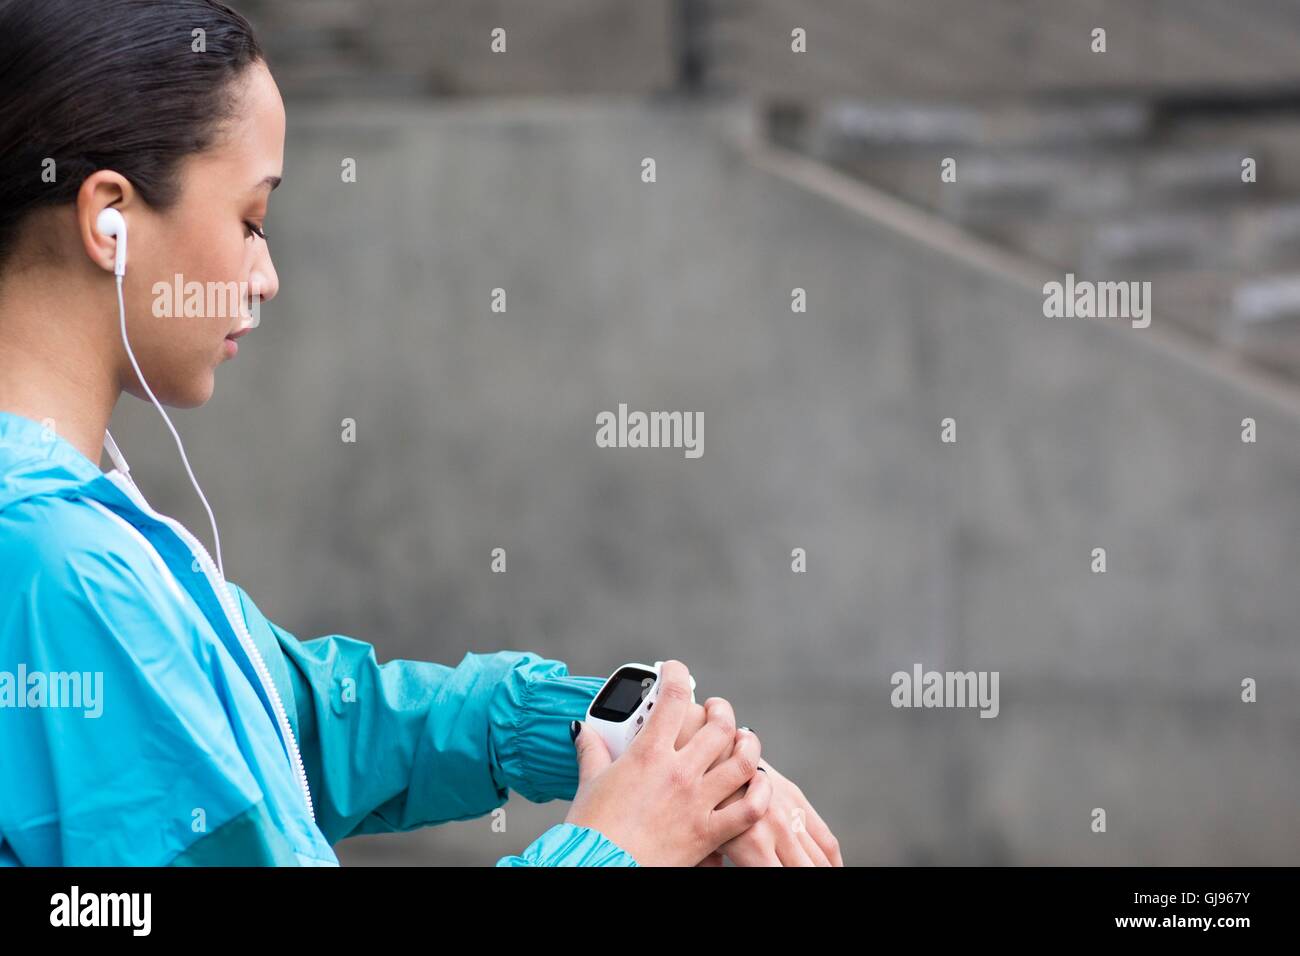 MODEL RELEASED. Young woman checking watch. Stock Photo